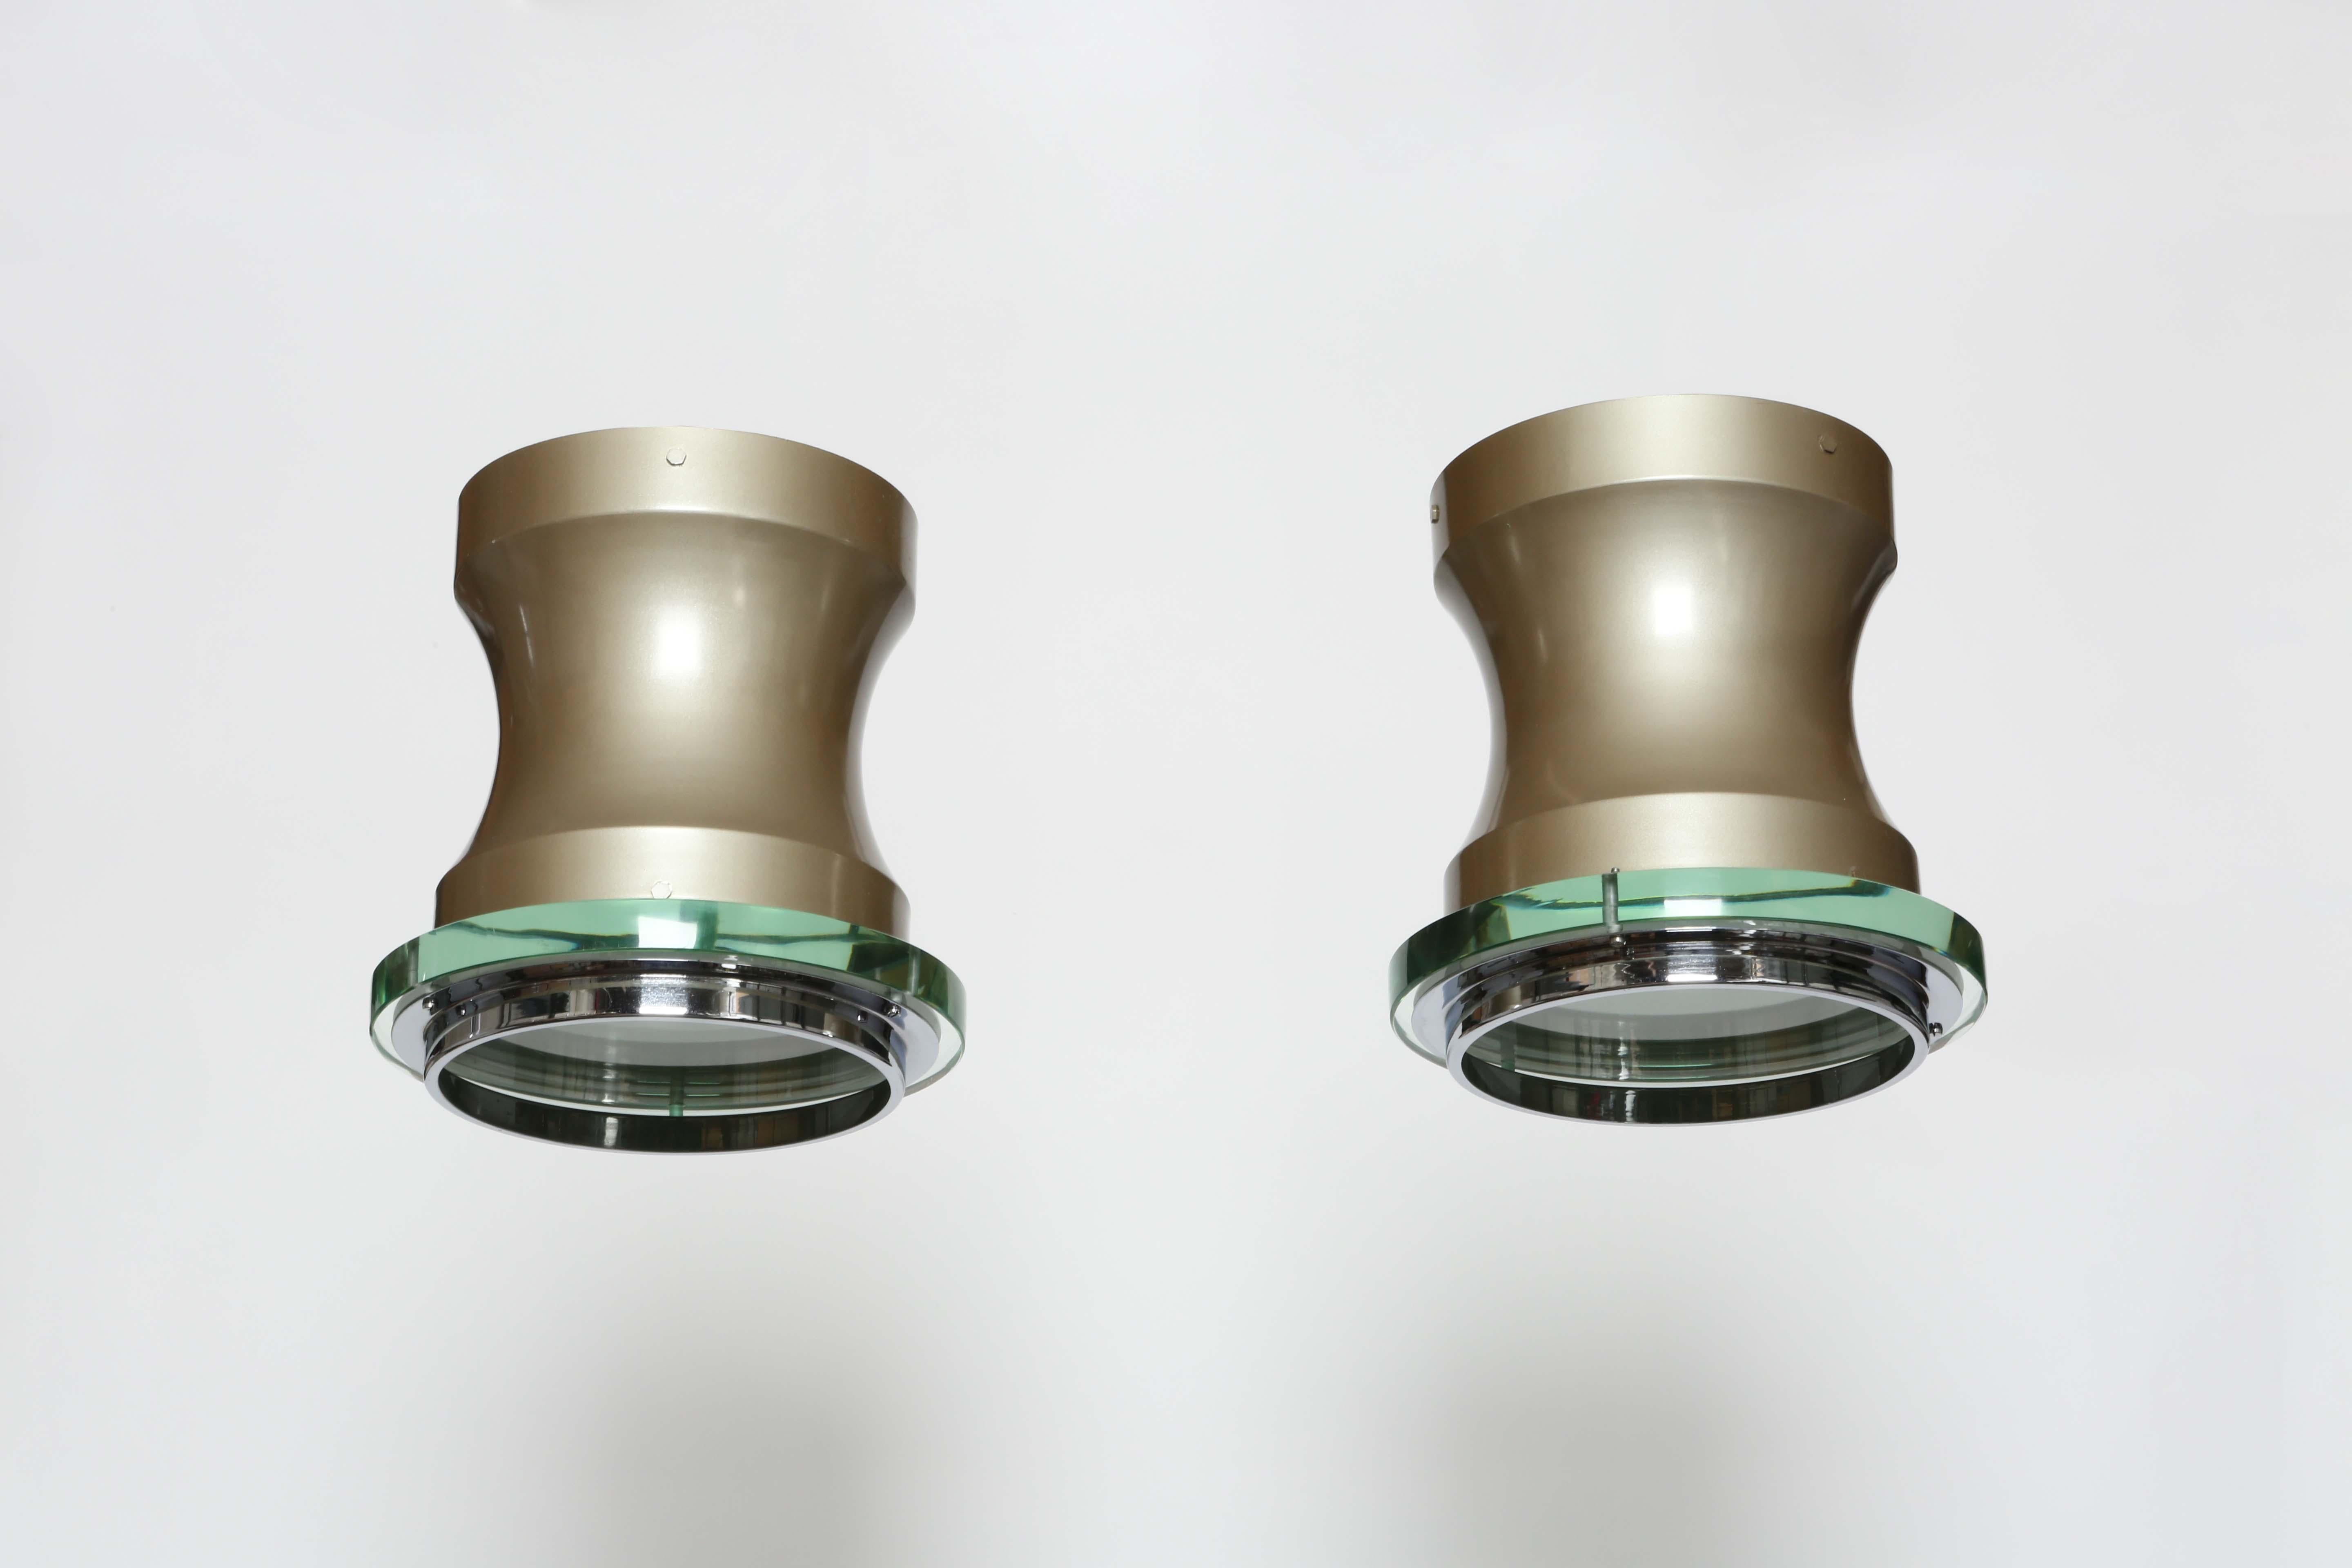 Stilnovo ceiling flush mount lights, a pair.
Designed and manufactured in Italy in 1960s.
Enameled metal, nickel plated metal, glass diffusers.
Label present.
Can be flush mounted or suspended.
One medium base bulb.
Complimentary US rewiring upon